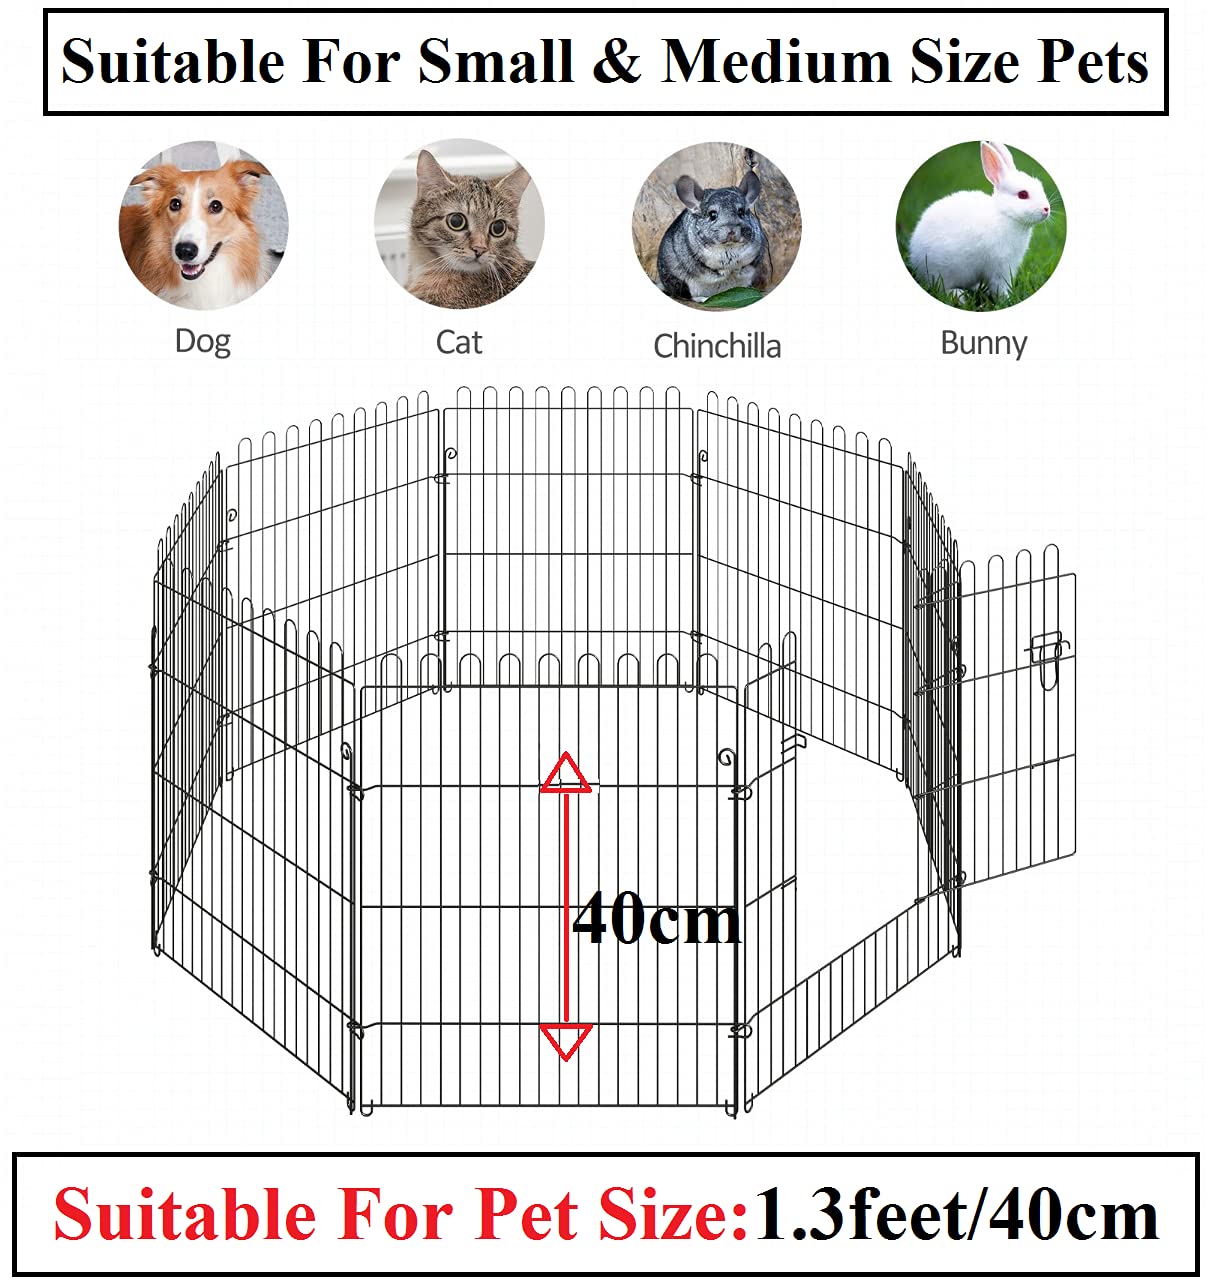 6 Foldable Metal Pet Dog Exercise with Gate - 47 * 47 * 24 inch Suitable for All Types of Small Breeds, Puppies, & for Dogs Up to 16 Inch Tall